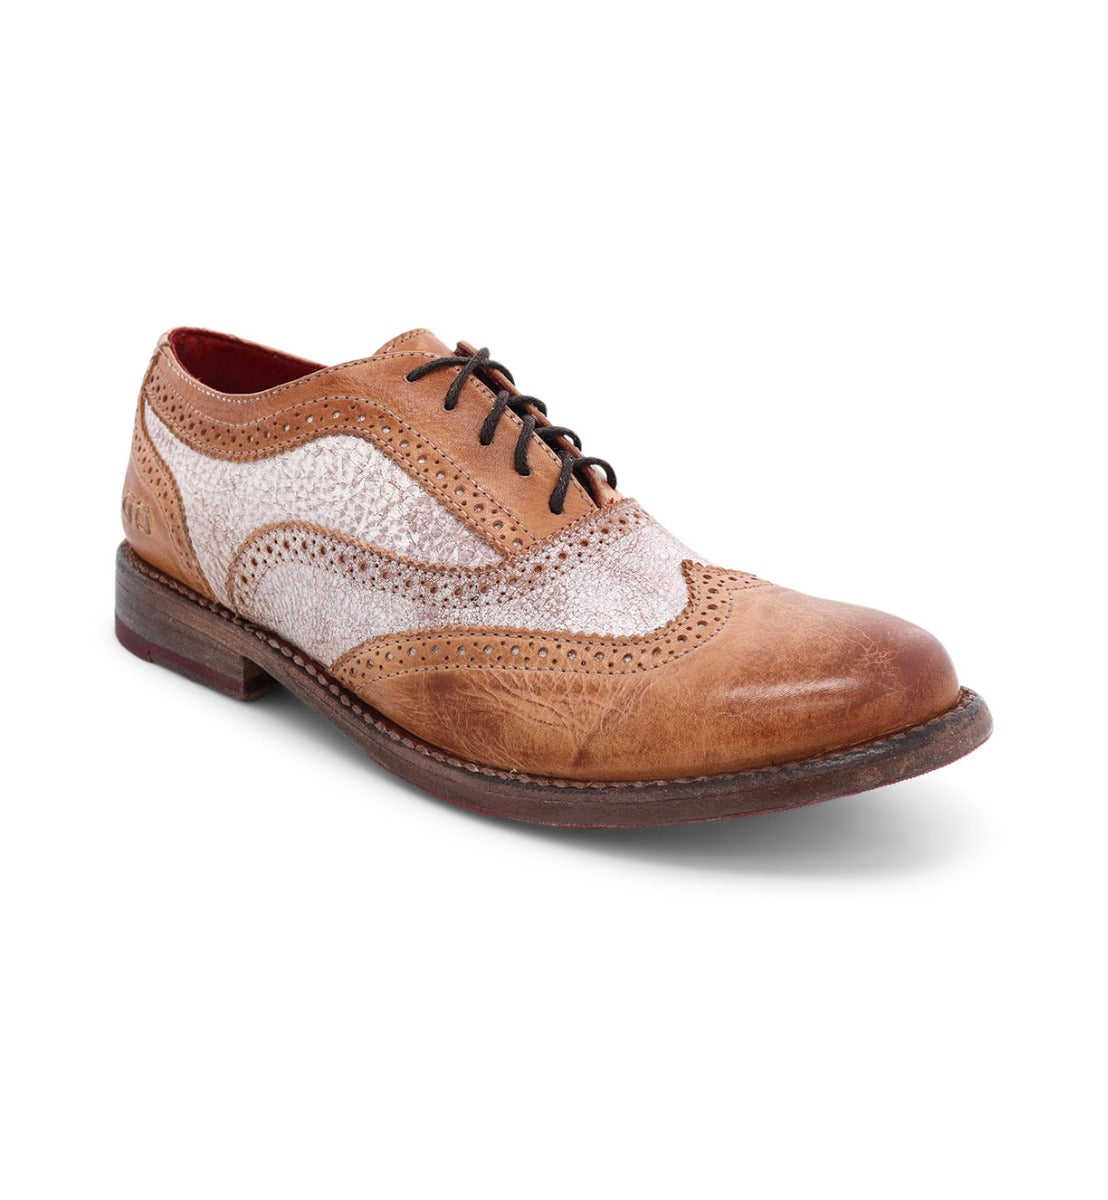 A distressed tan and white wingtip oxford shoe called Lita by Bed Stu.